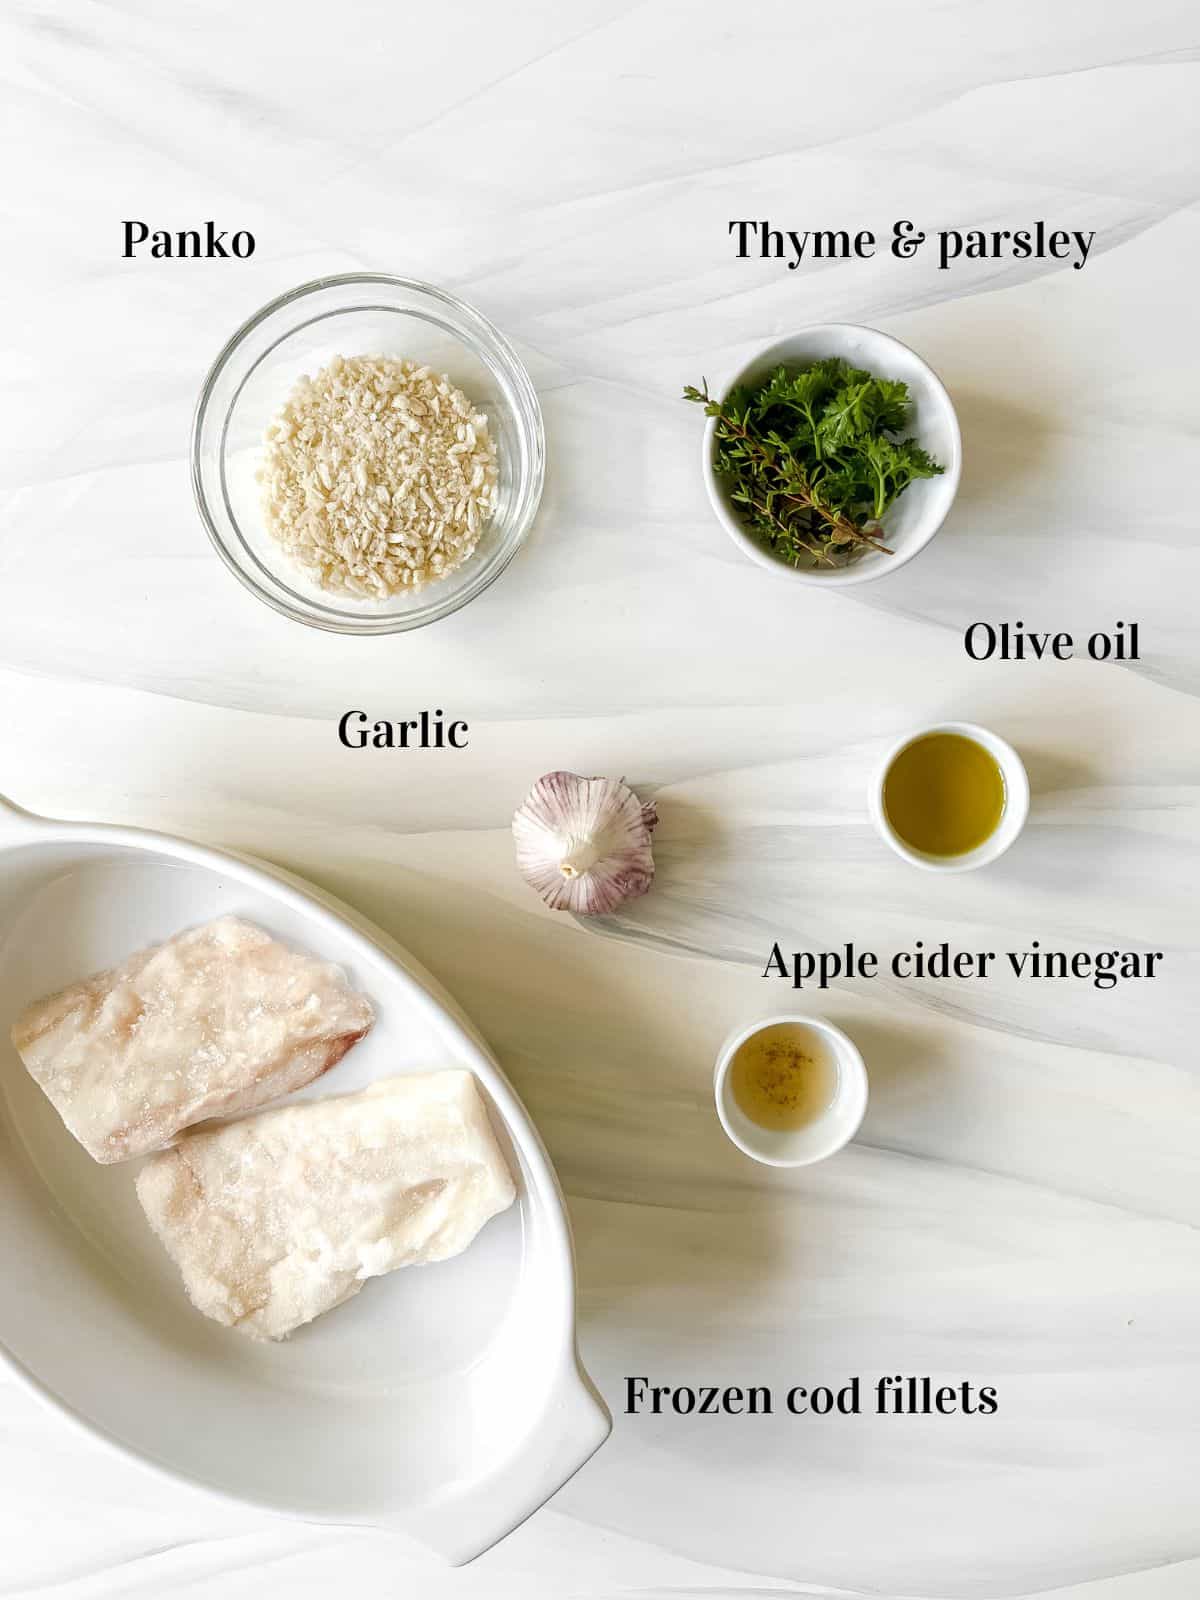 individually labelled ingredients to make baked cod with panko including frozen cod fillets, herbs and panko.